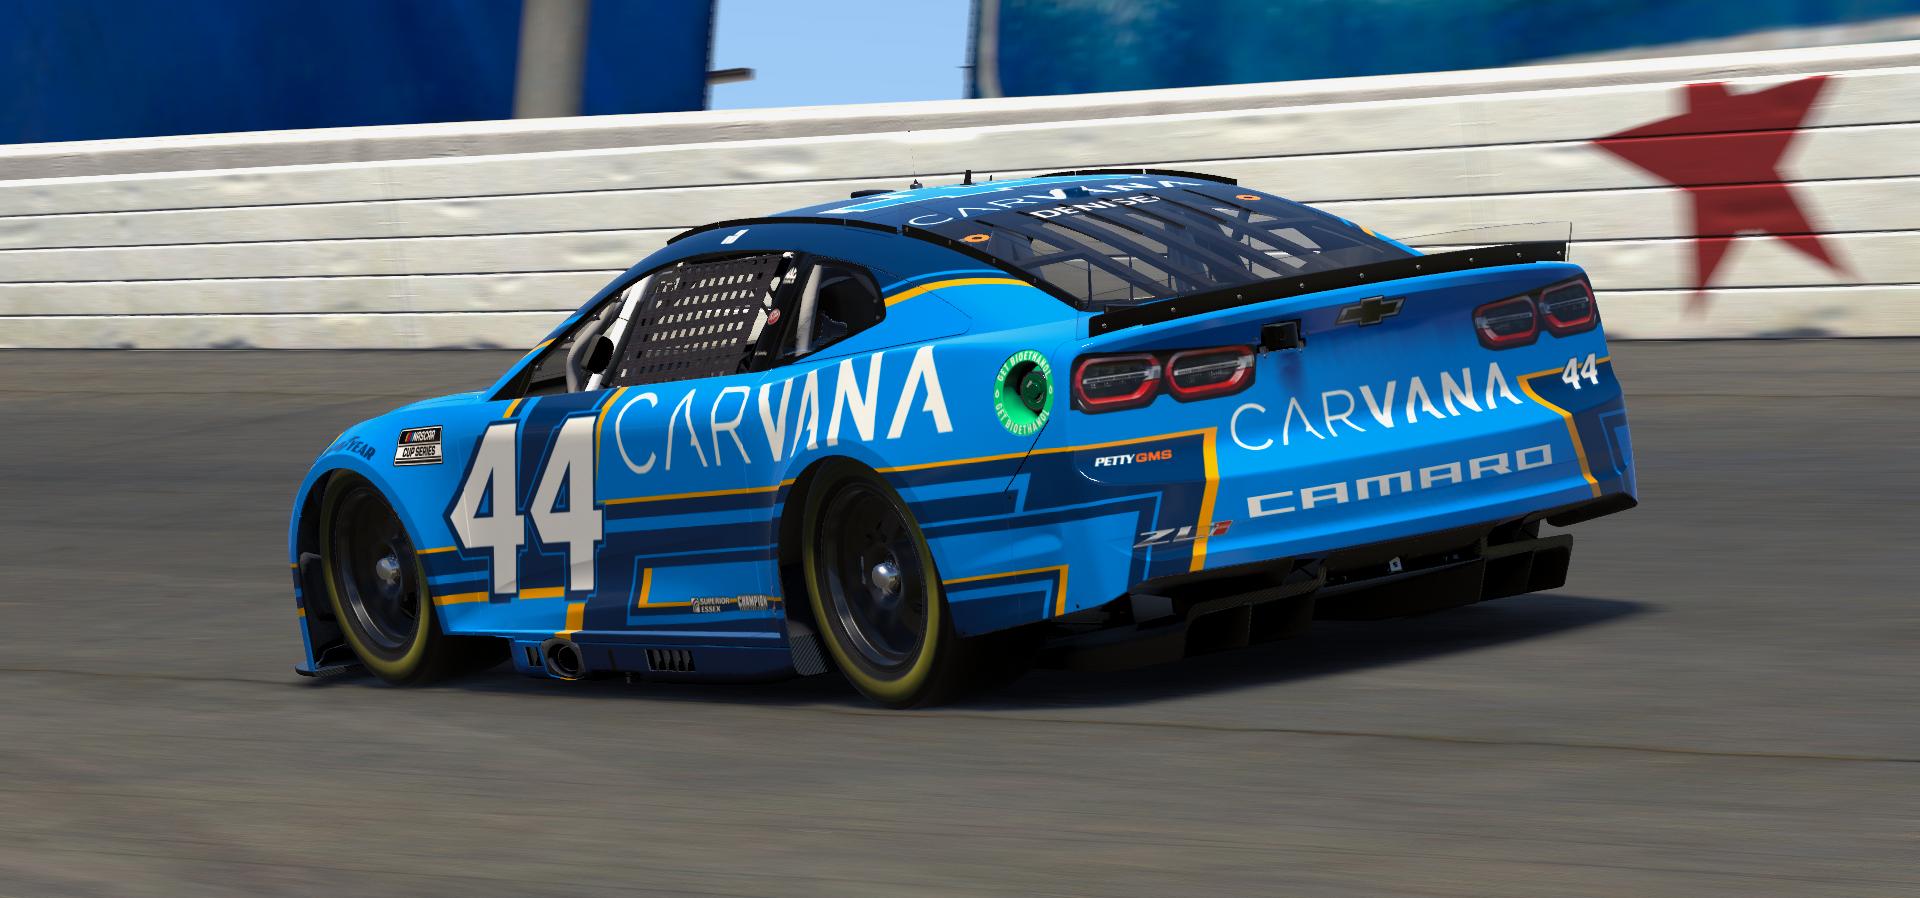 Preview of Jimmie Johnson Carvana Camaro 2023 Concept Numbered by Doug DeNise